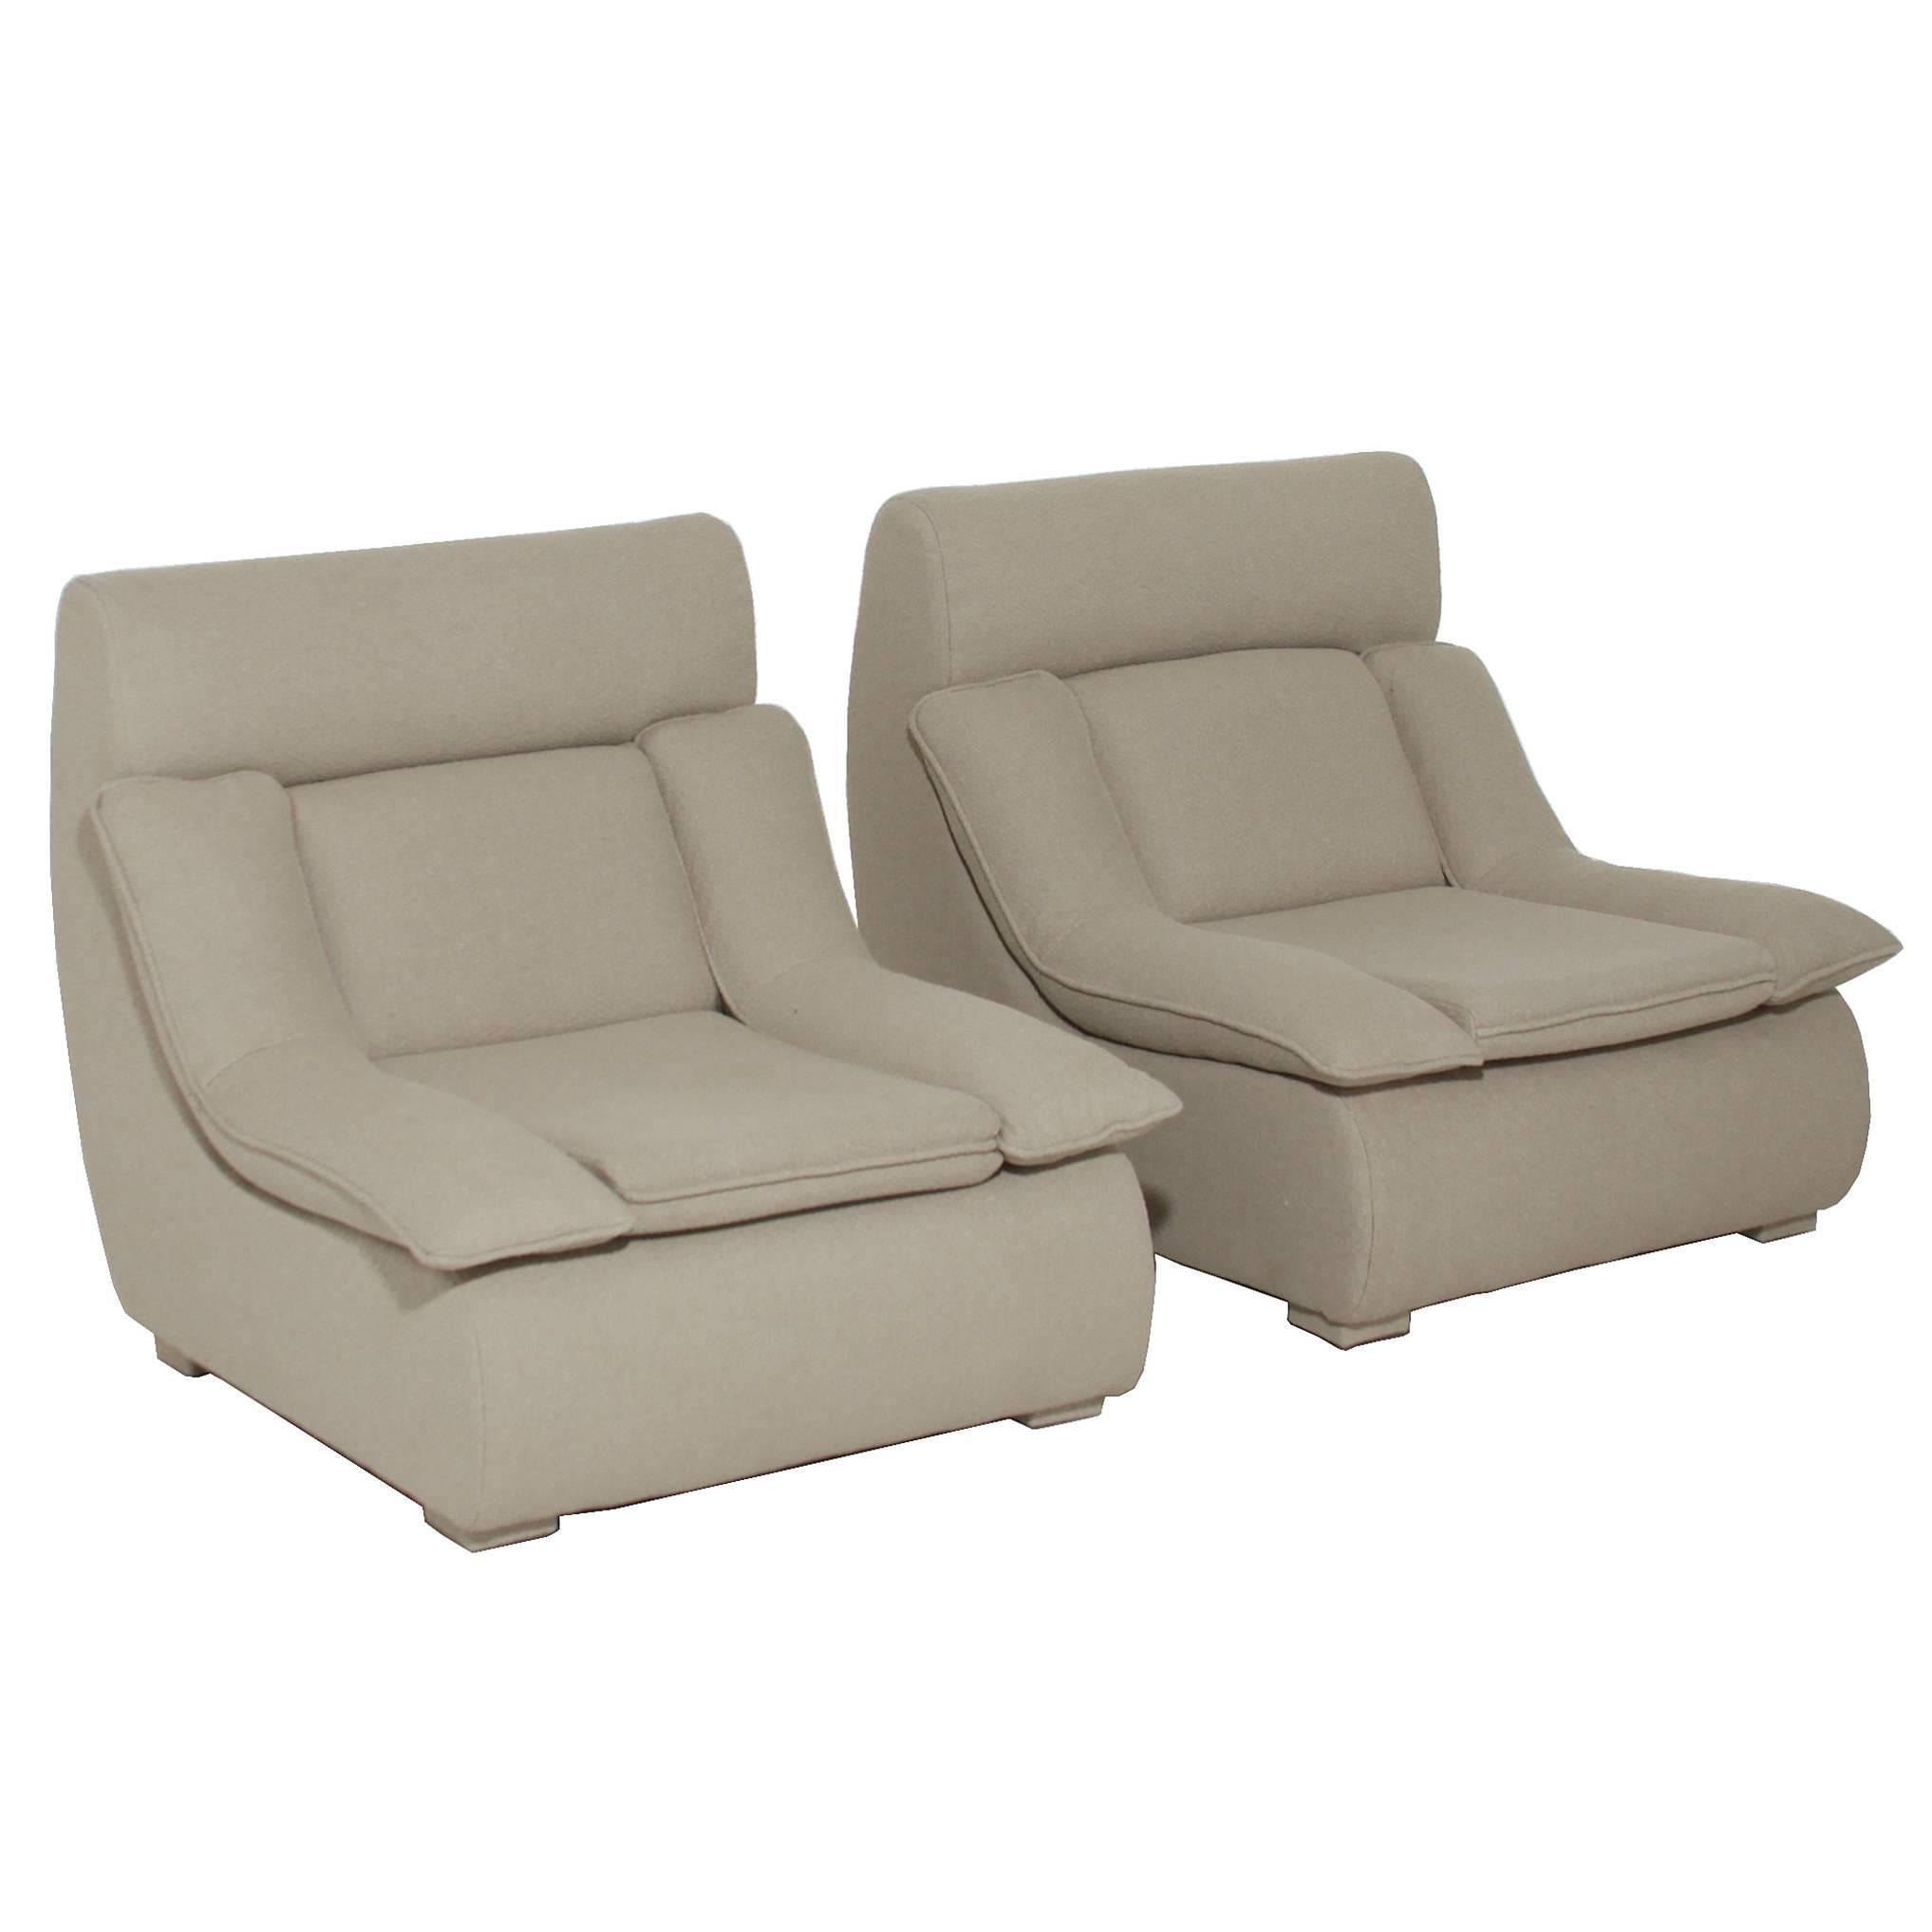 Pair of vintage Brazilian lounge chairs upholstered in oatmeal bouclé fabric. Measures: Seat height 15, seat depth 20. Many pieces are stored in our warehouse, so please click on 